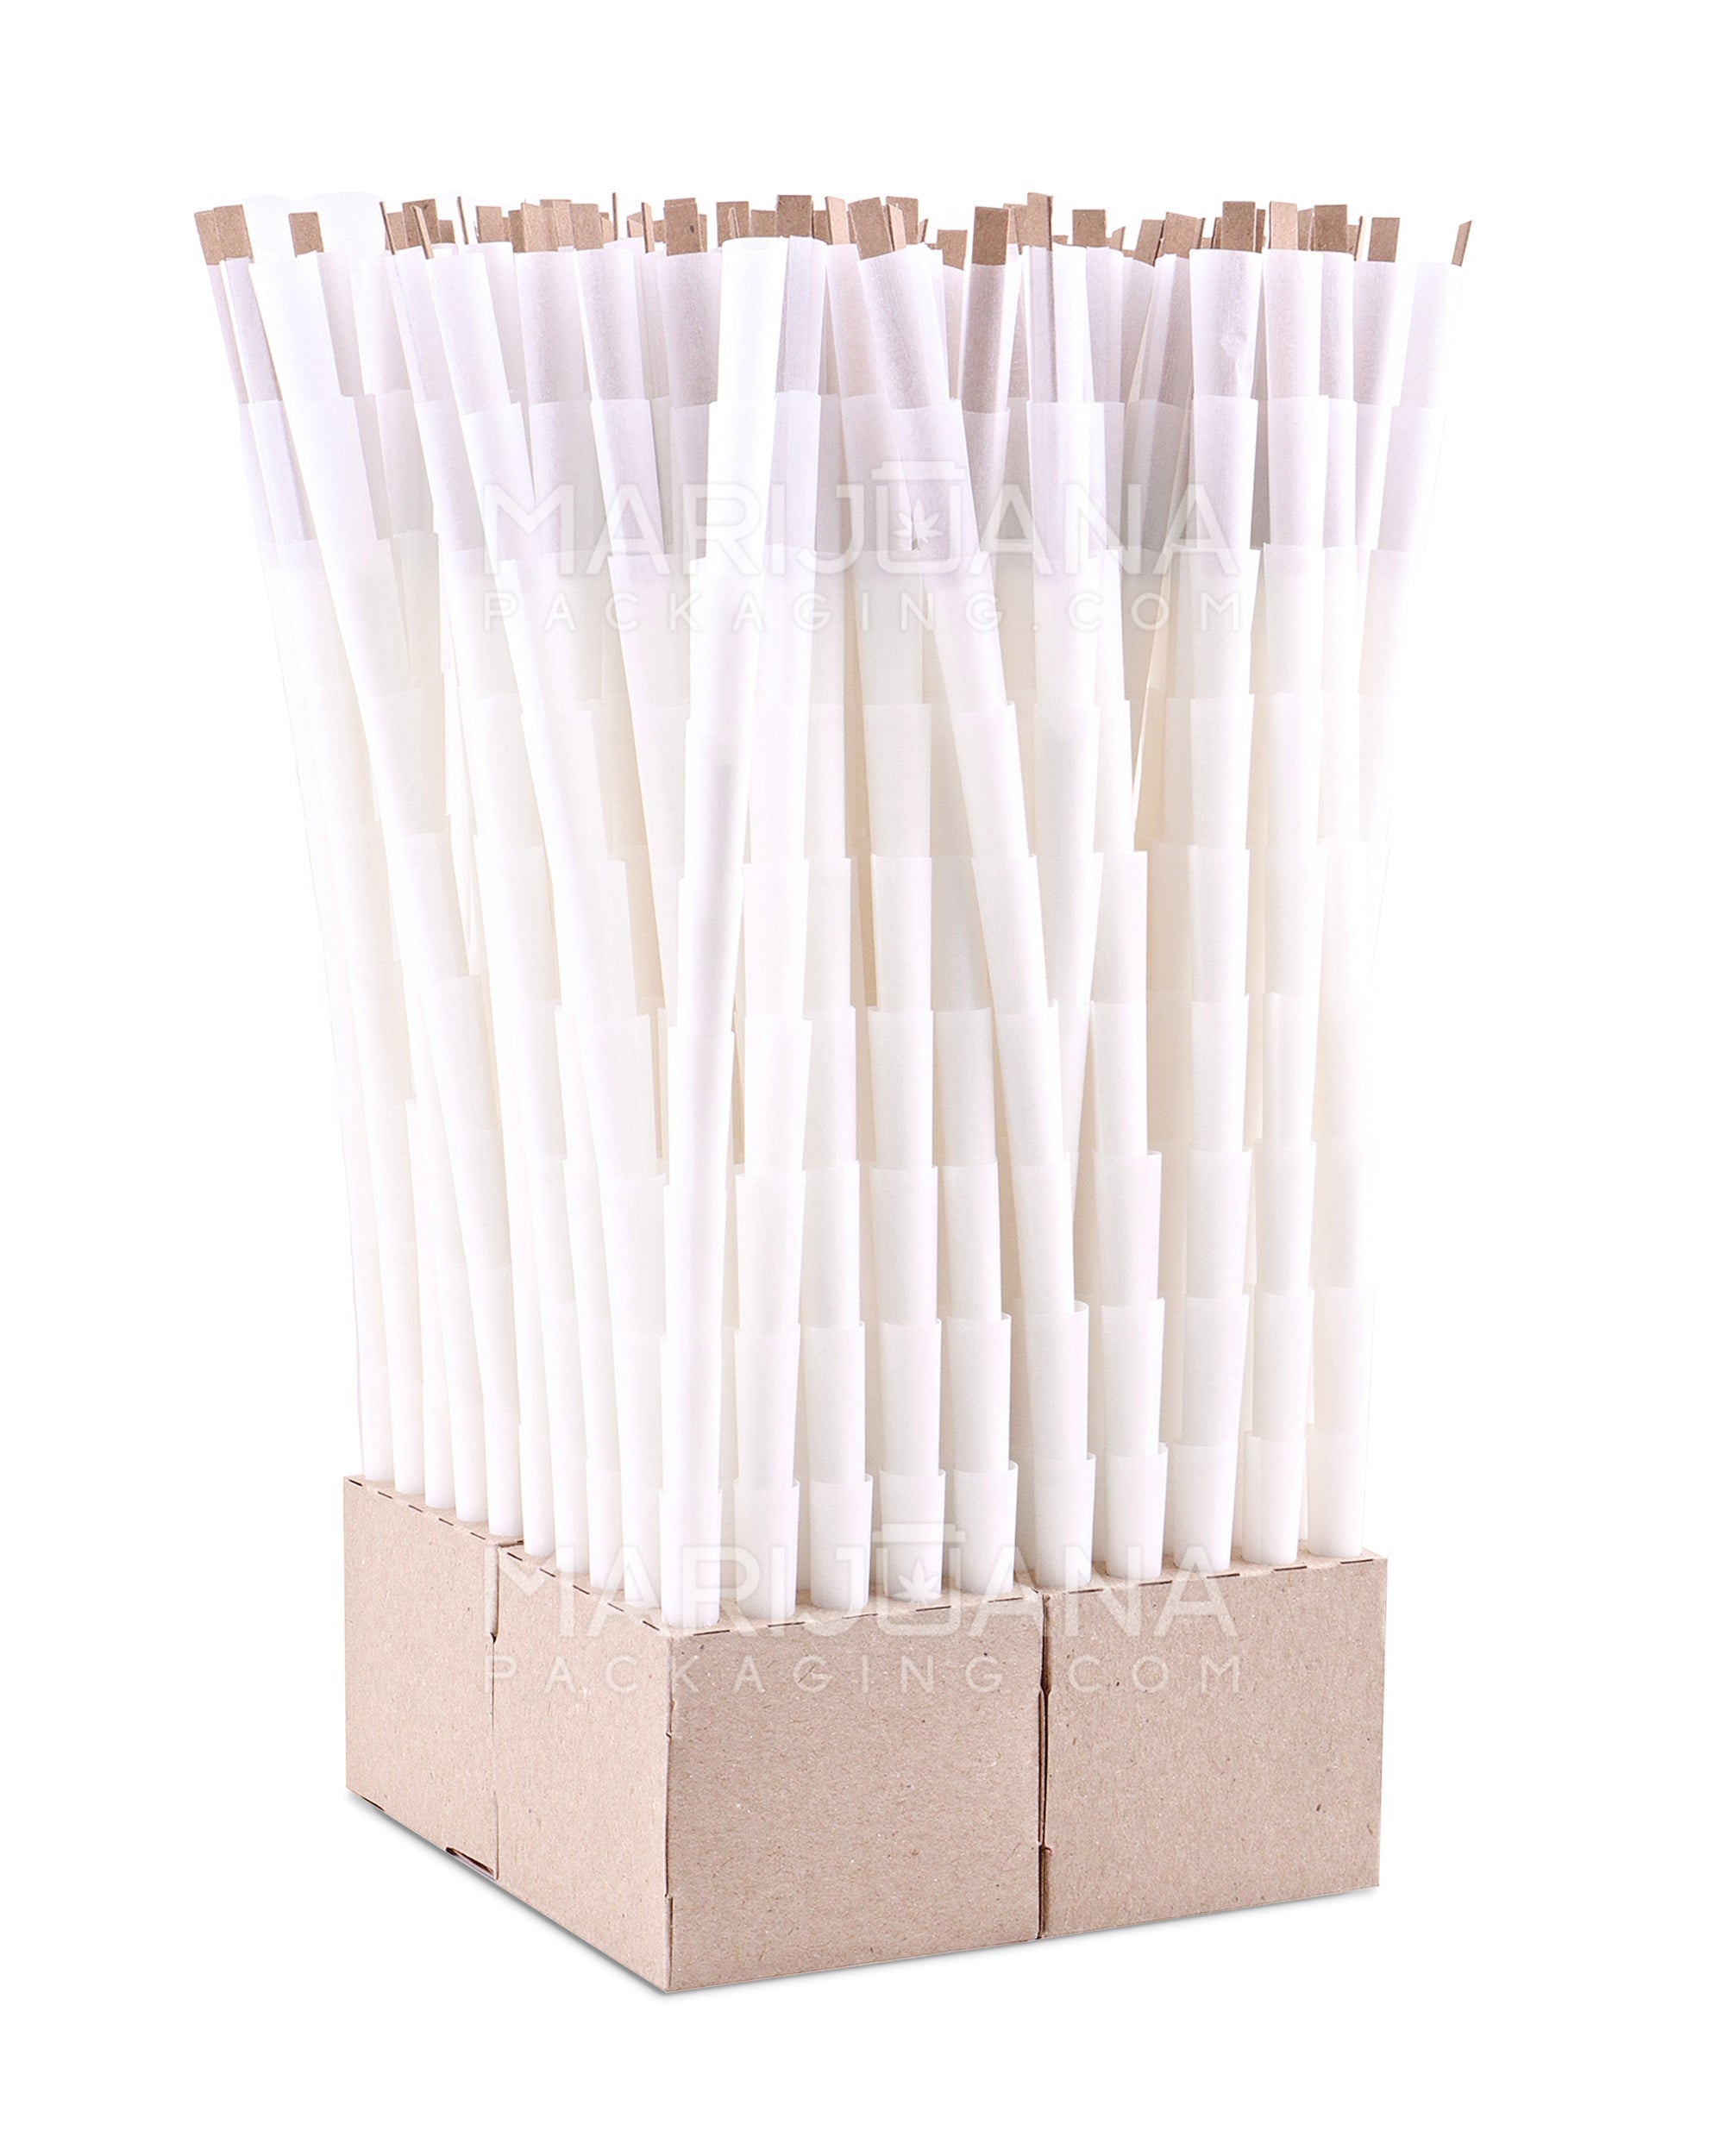 CONES | 98 Special Size Pre Rolled Cones | 98mm - Bleached Paper - 1000 Count